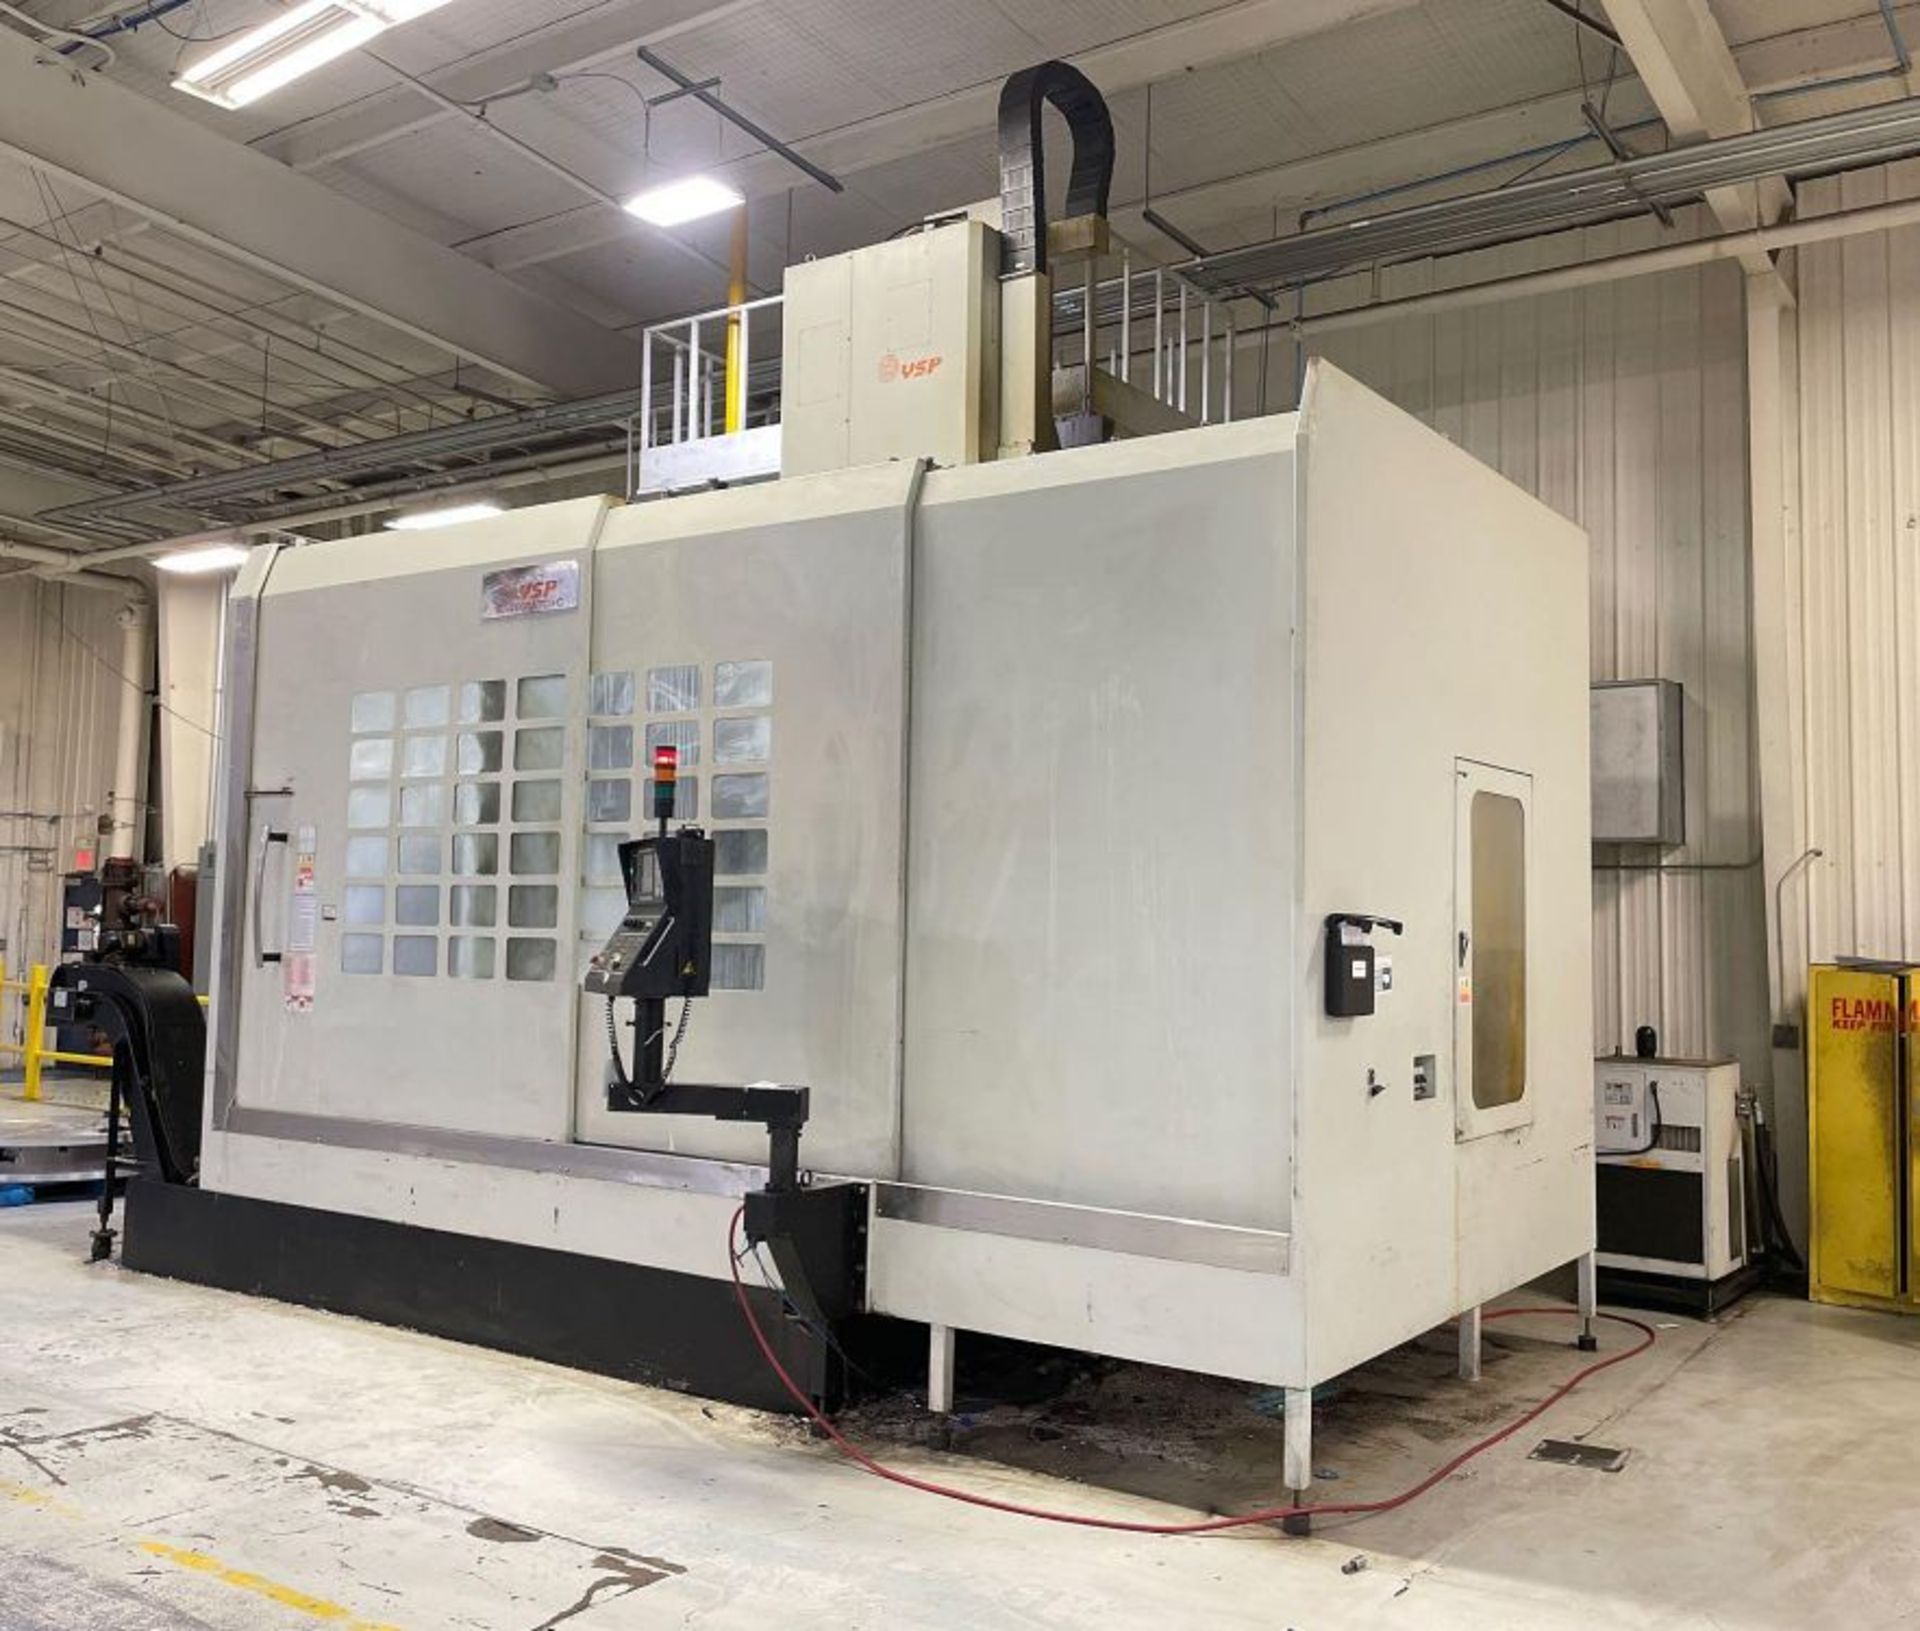 YSP VL-2500ATC+C 5-Axis CNC Vertical Boring Mill, Fanuc 0iTD, 98" tbl, live tool, RA milling, New - Image 2 of 7